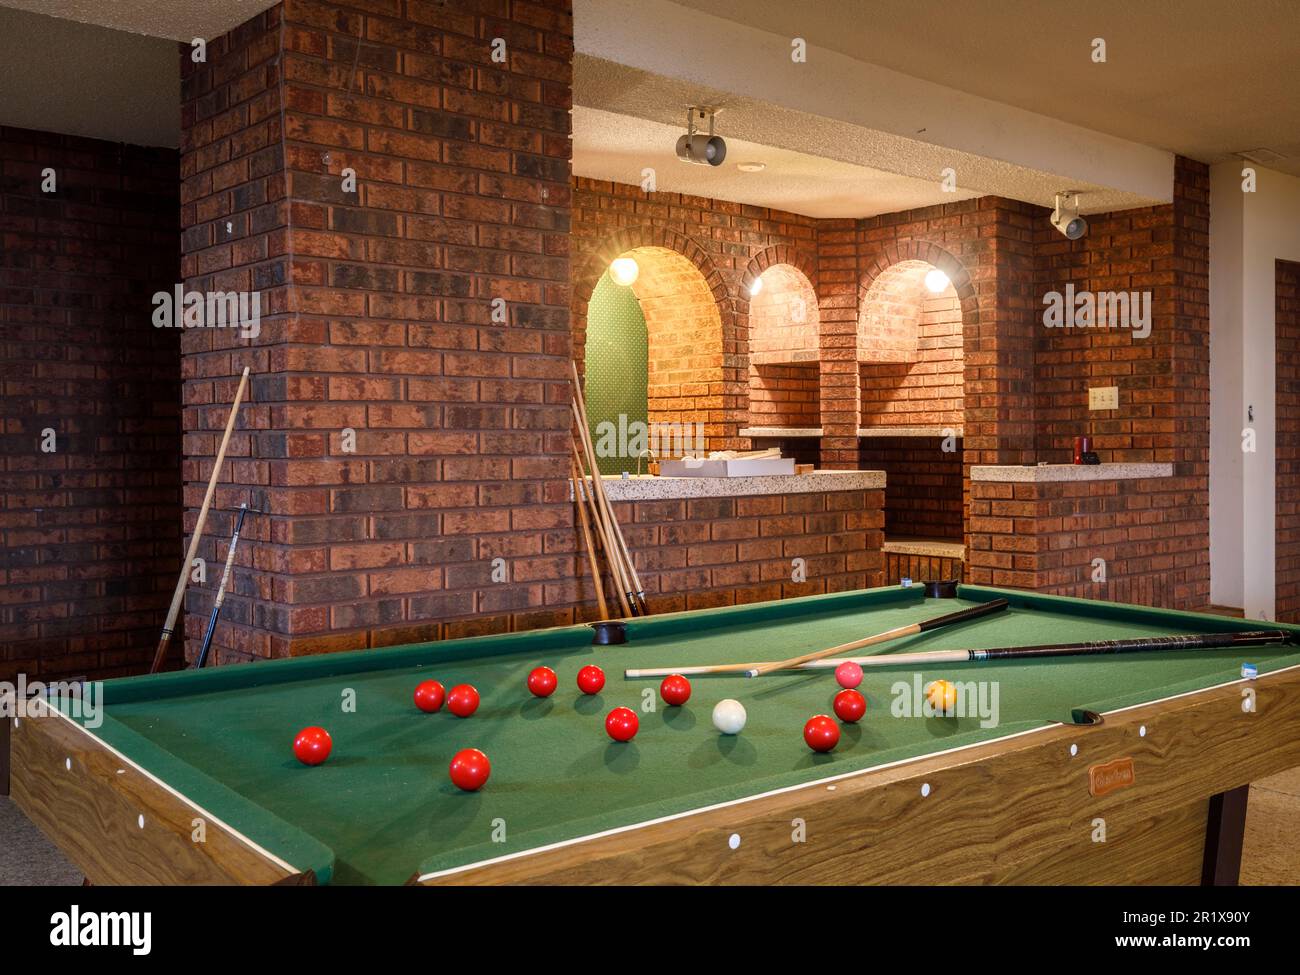 A billiards table with a home bar in the background in the basement of a large home.  This house has since been demolished. Stock Photo